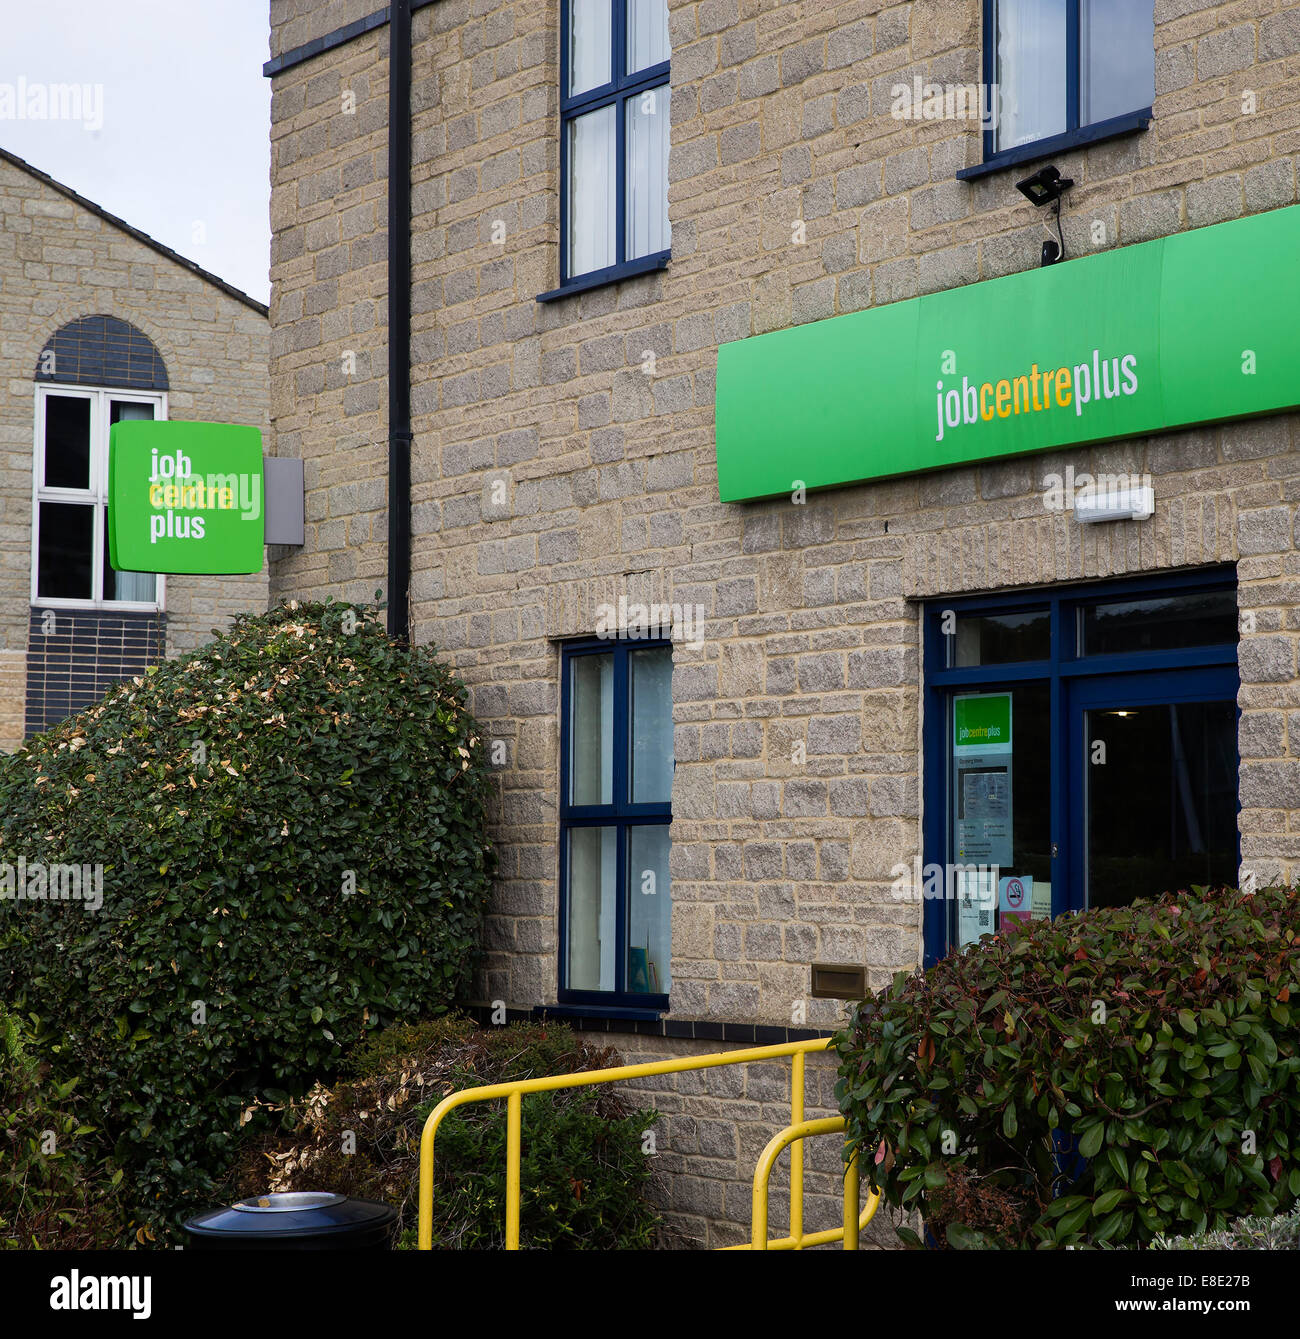 01/10/2014 Witney Job Centre Plus. Suspicious package story. Stock Photo